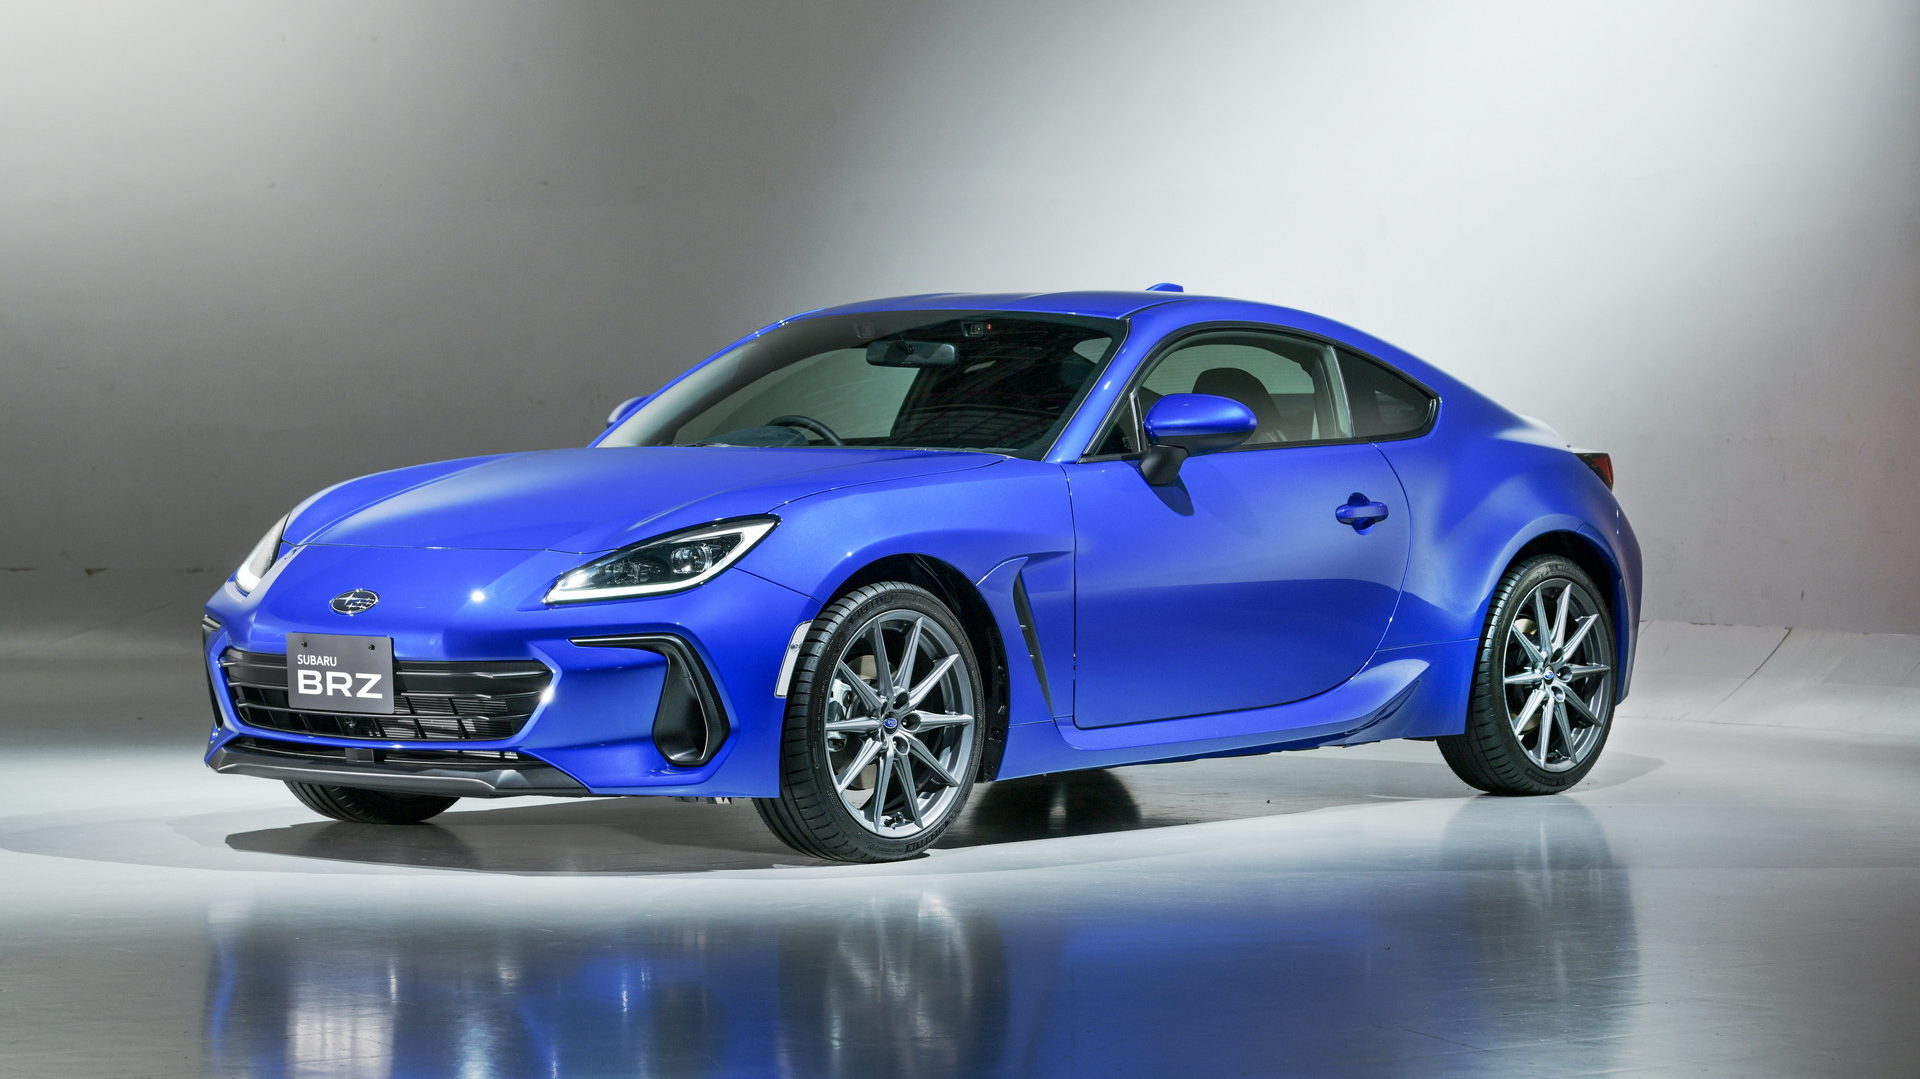 Subaru Philippines Reveals the Official Price of 2022 BRZ